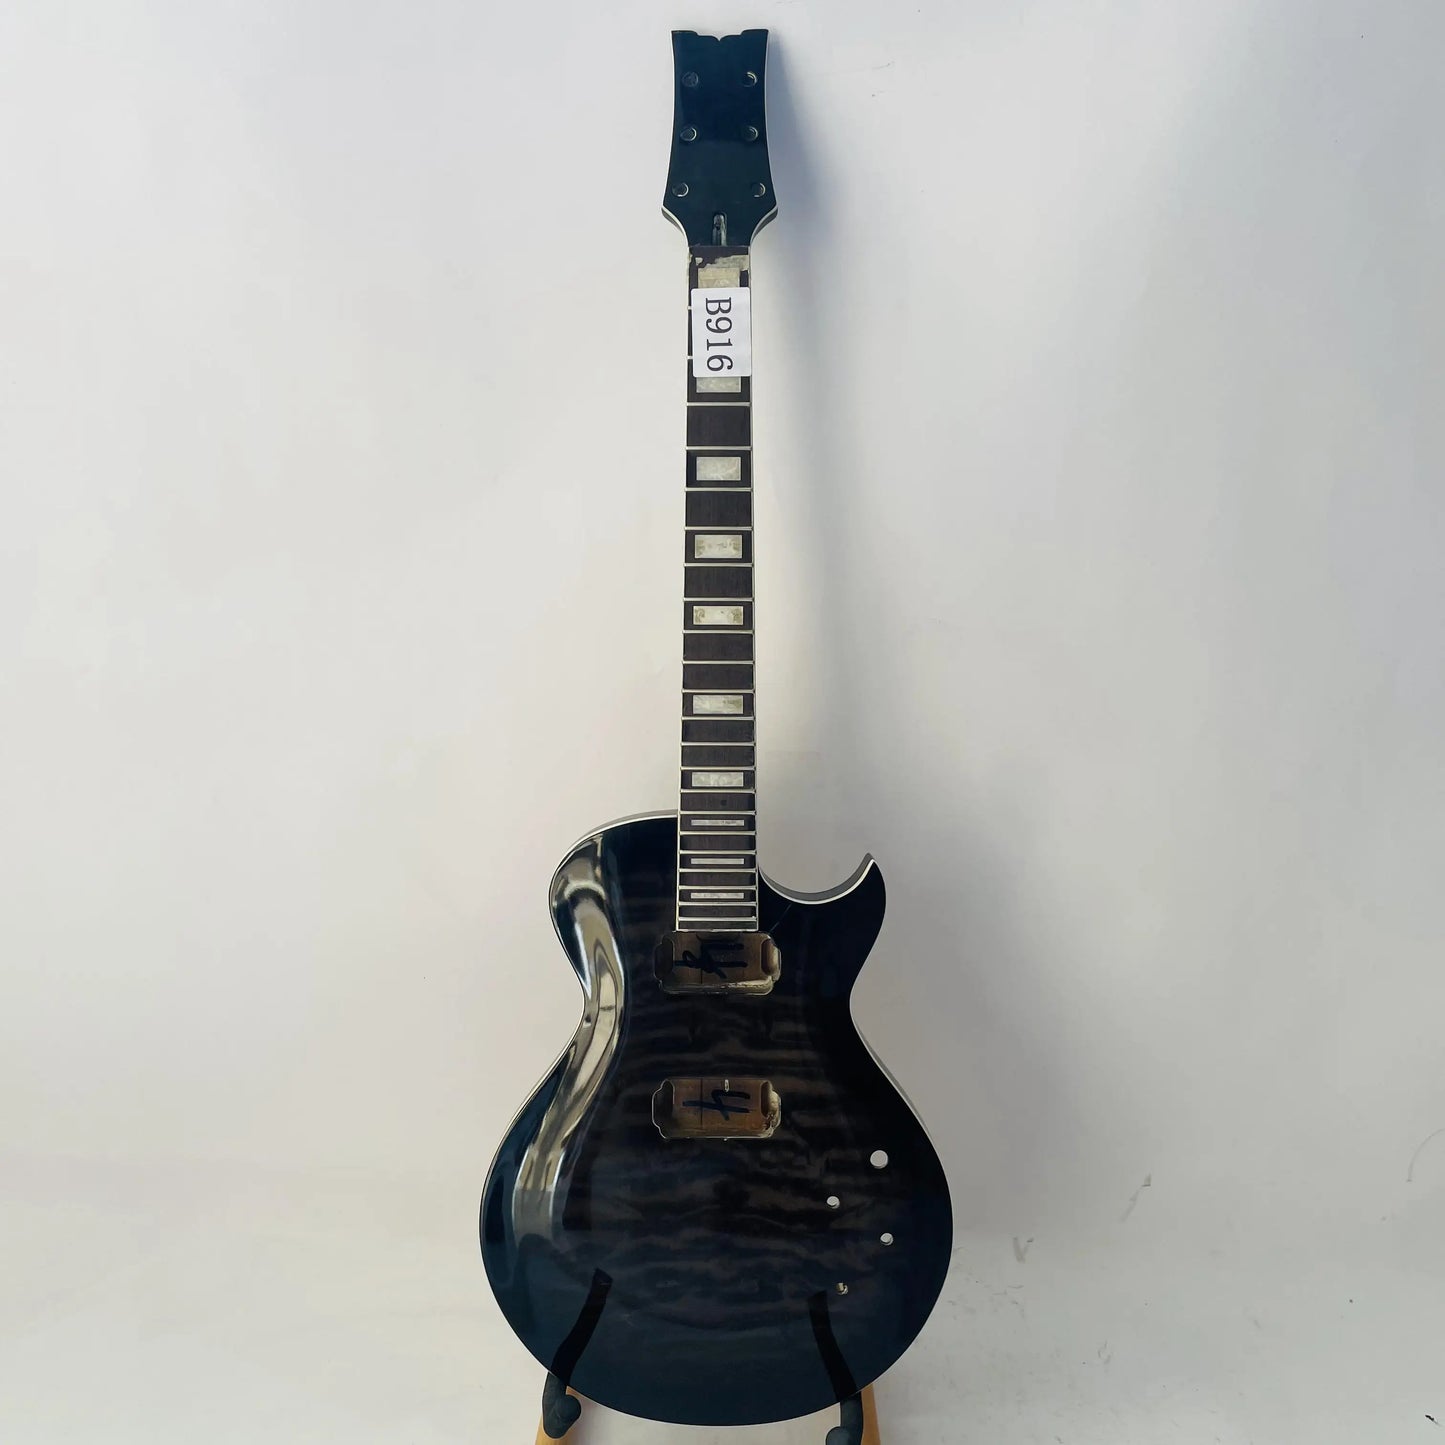 Ibanez Les Paul LP Style Guitar Quilted Maple Top Black Body with Neck, Rosewood Fingerboard